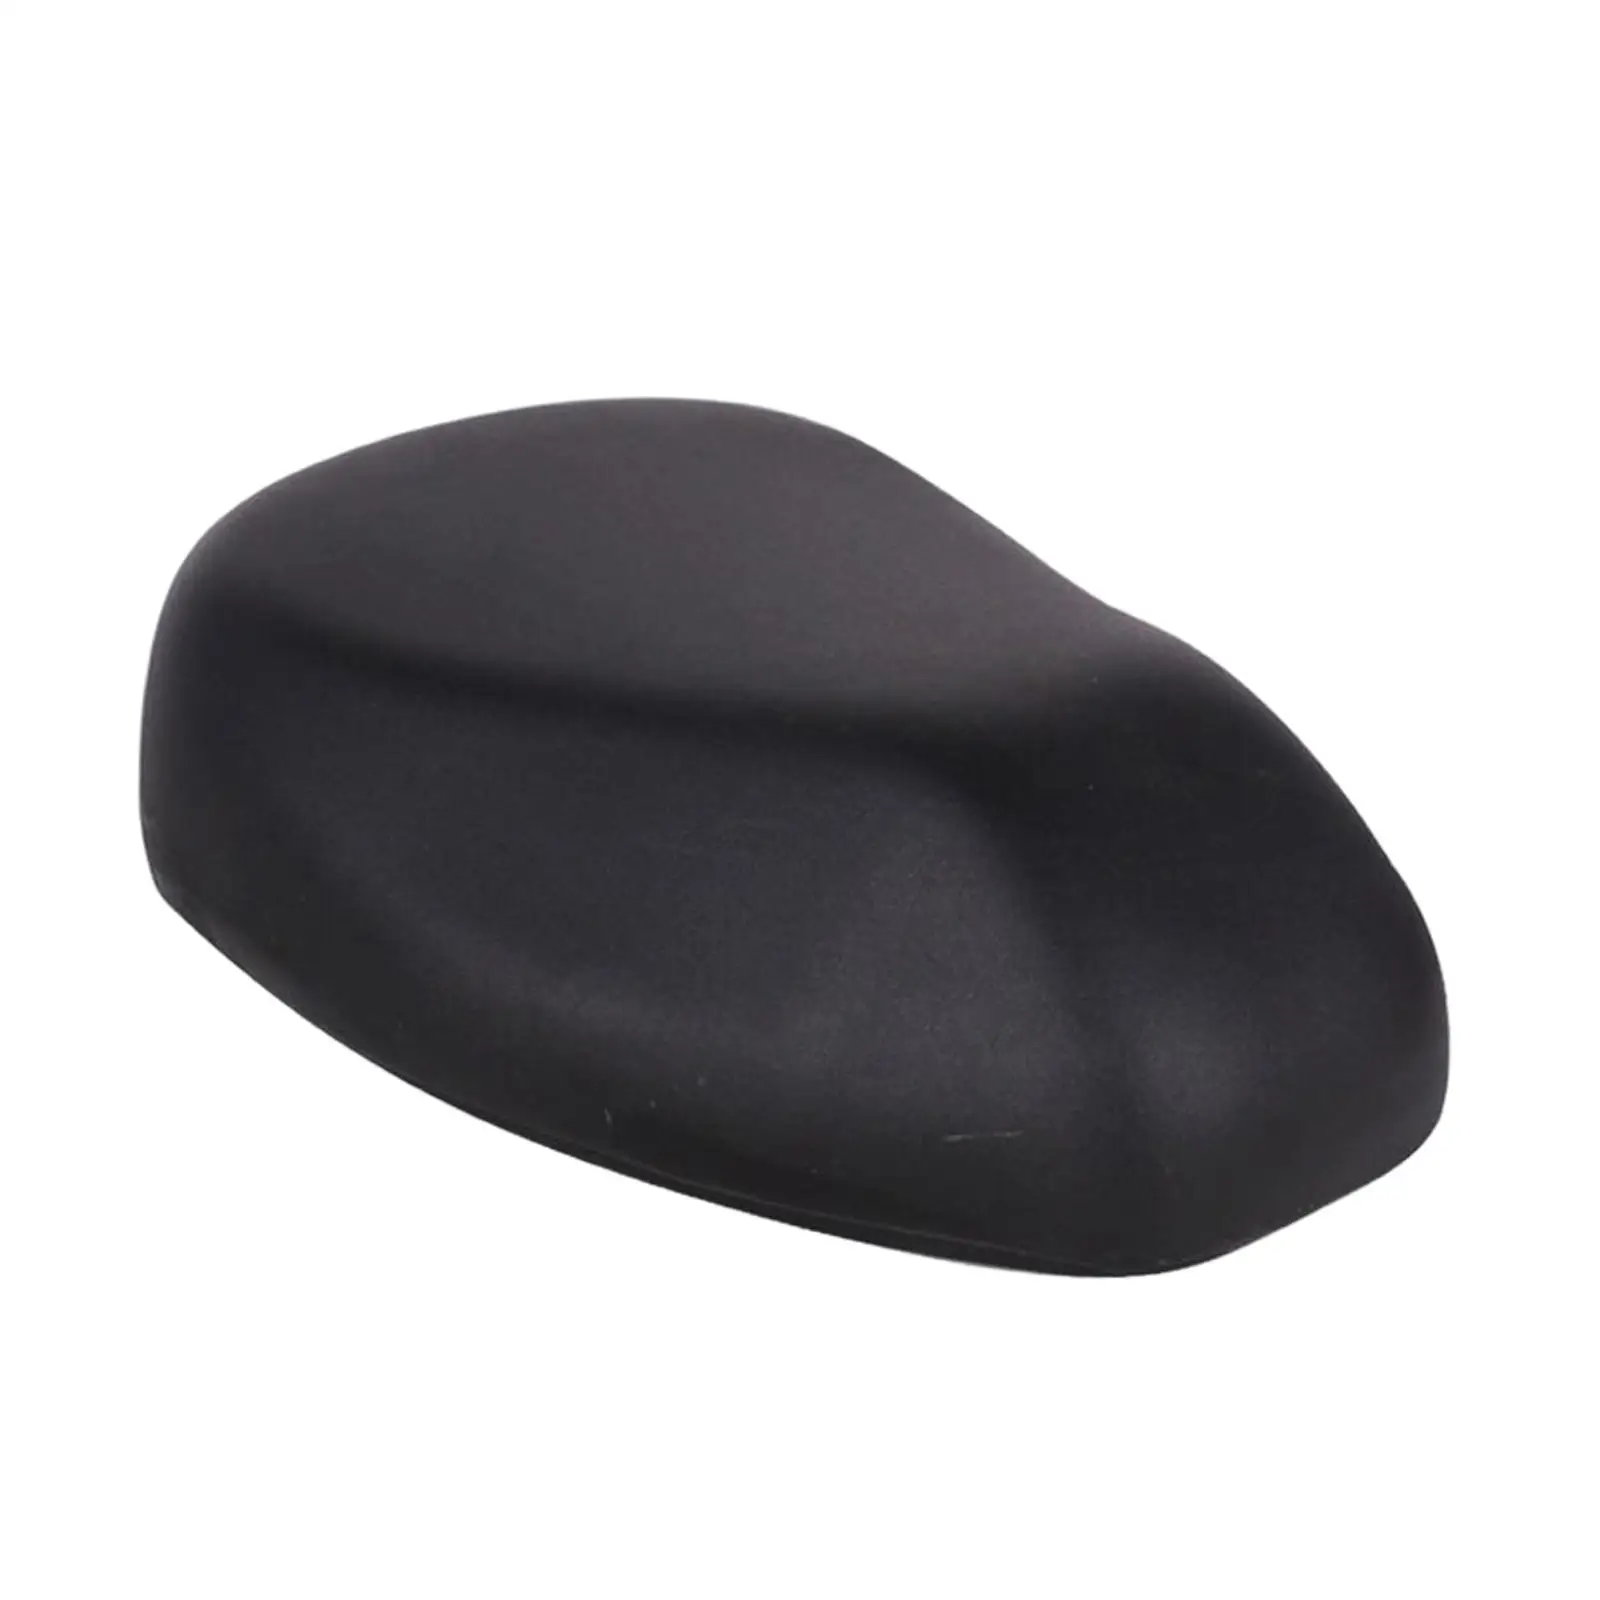 Bike Seat Cushion Replacement Saddle Wide Comfortable Soft Shock Absorbing Fit for Electric Scooter Mountain Bike Road Bike